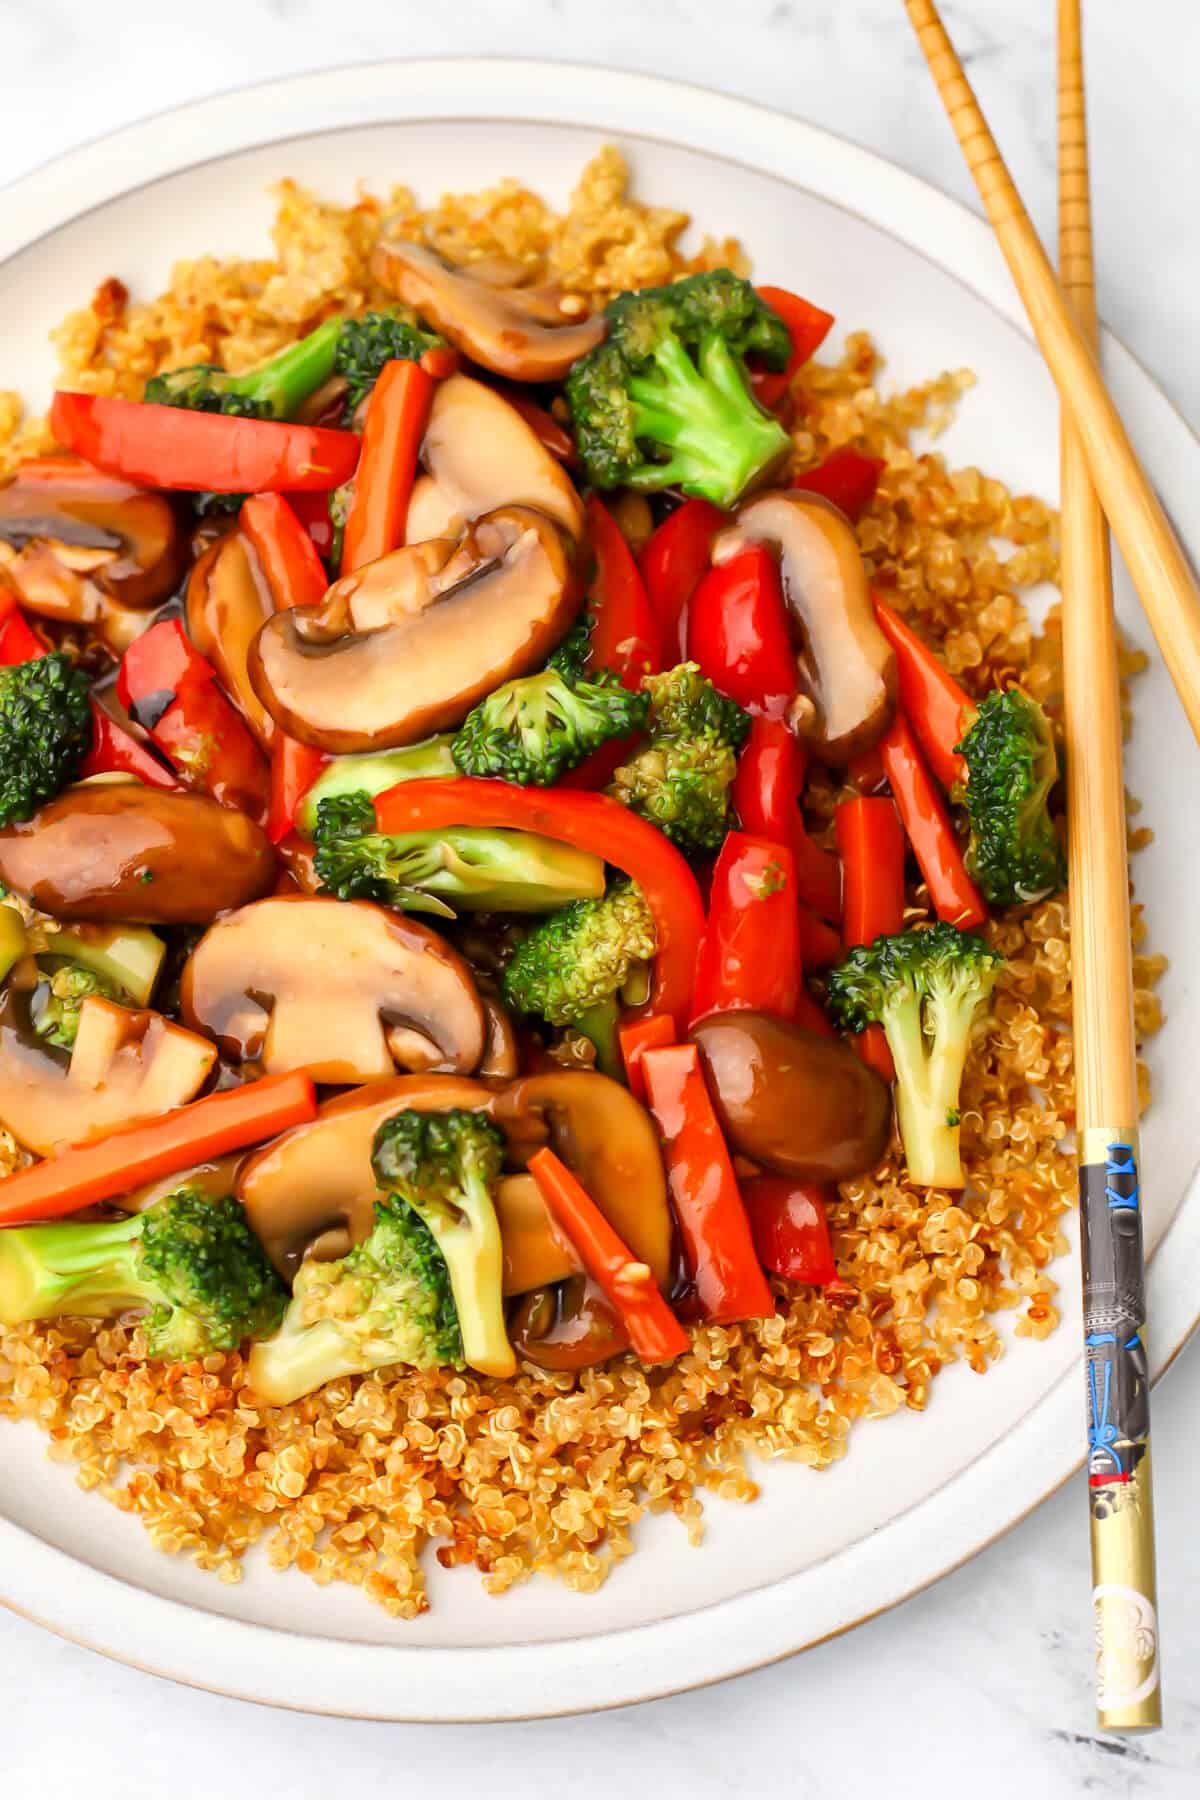 Simple vegetable stir-fry served over quinoa with chop sticks on the side.